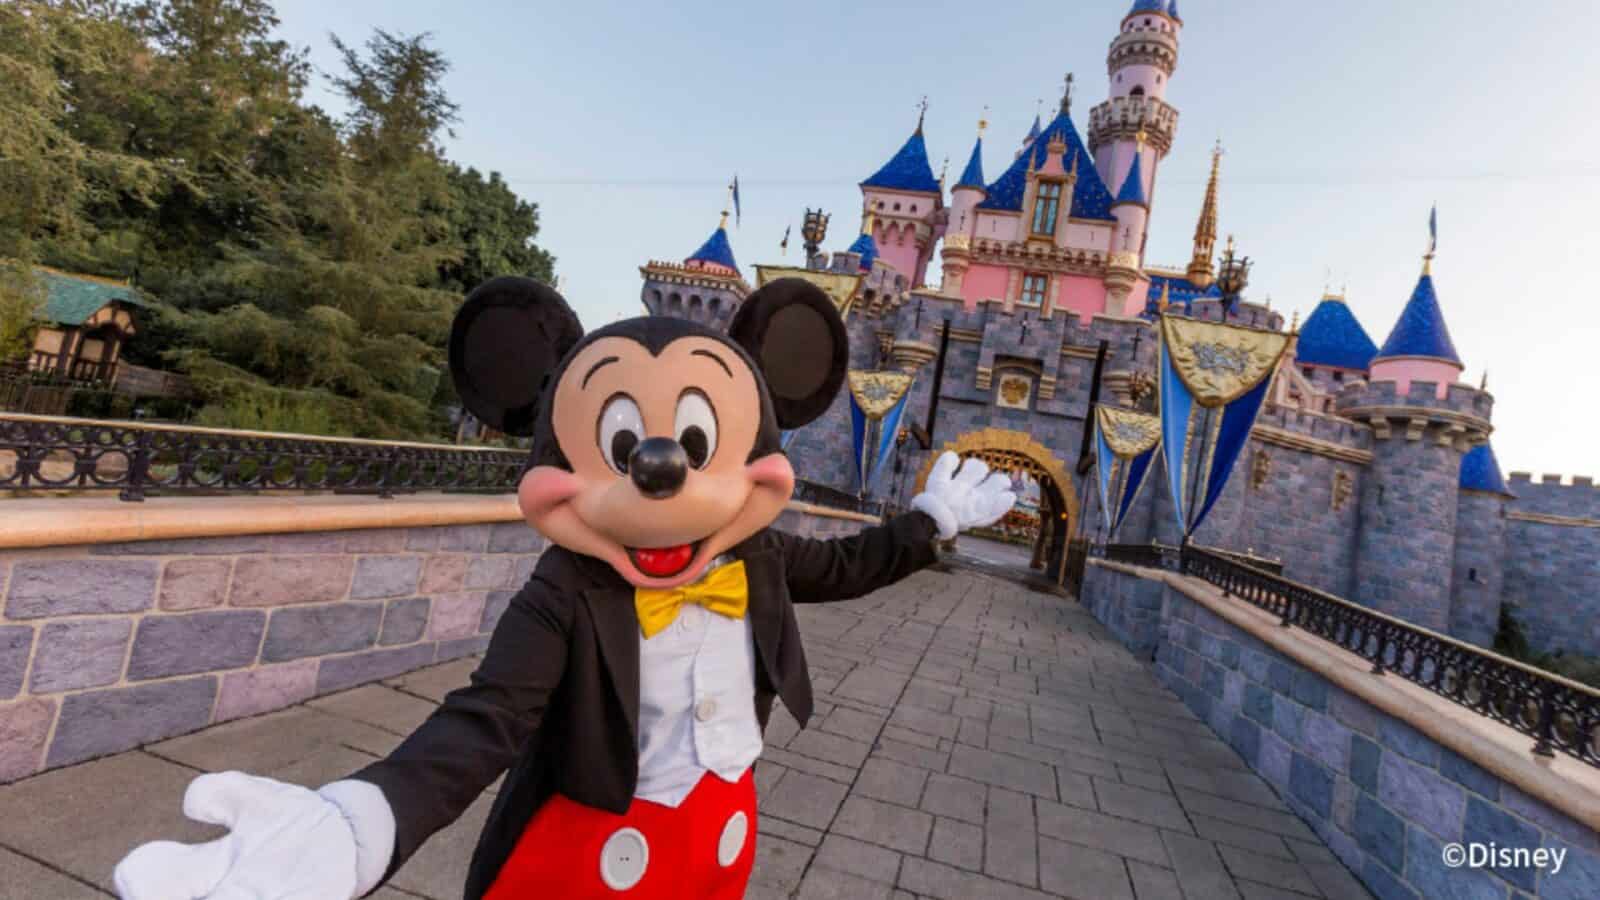 Disney Seeks a Transaction Lawyer As The Company Plans To Expands Into Web3 According to a LinkedIn post published two days ago, The Walt Disney Company is seeking a principal counsel for corporate transactions, emerging technologies, and NFTs!